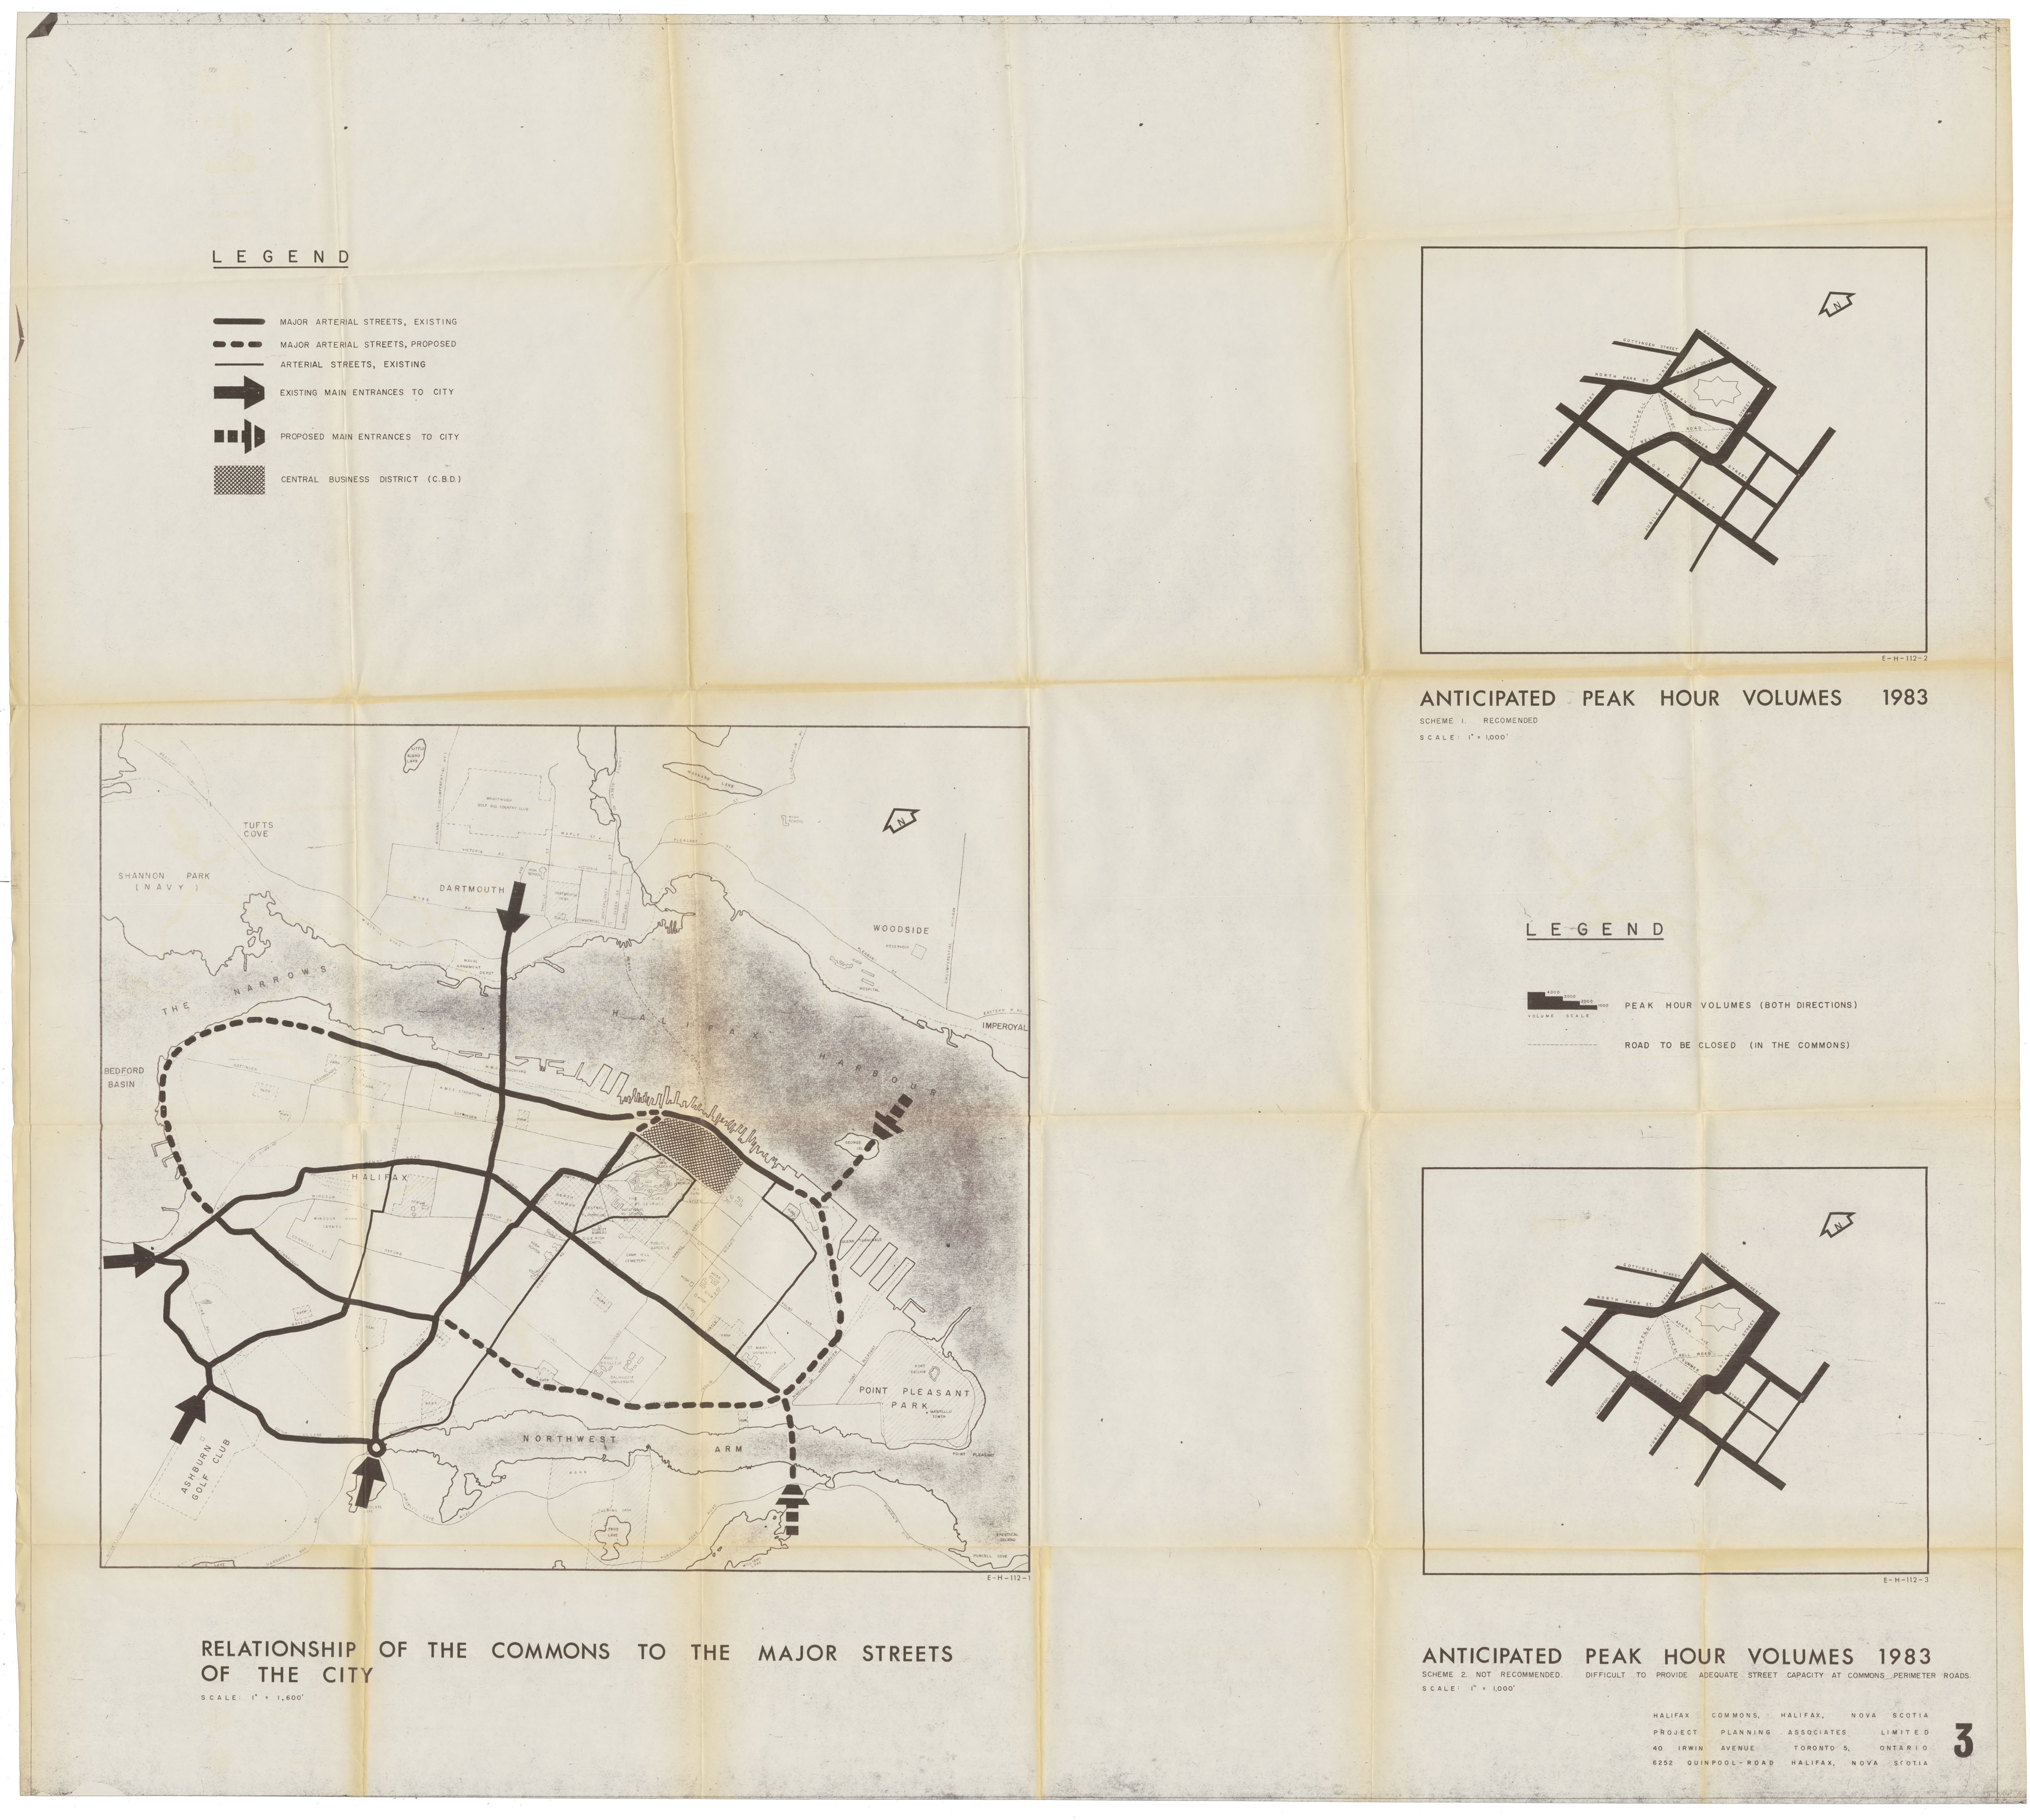 maps : Halifax Commons, Halifax, N.S. Anticiapted Peak Hour Volumes 1983